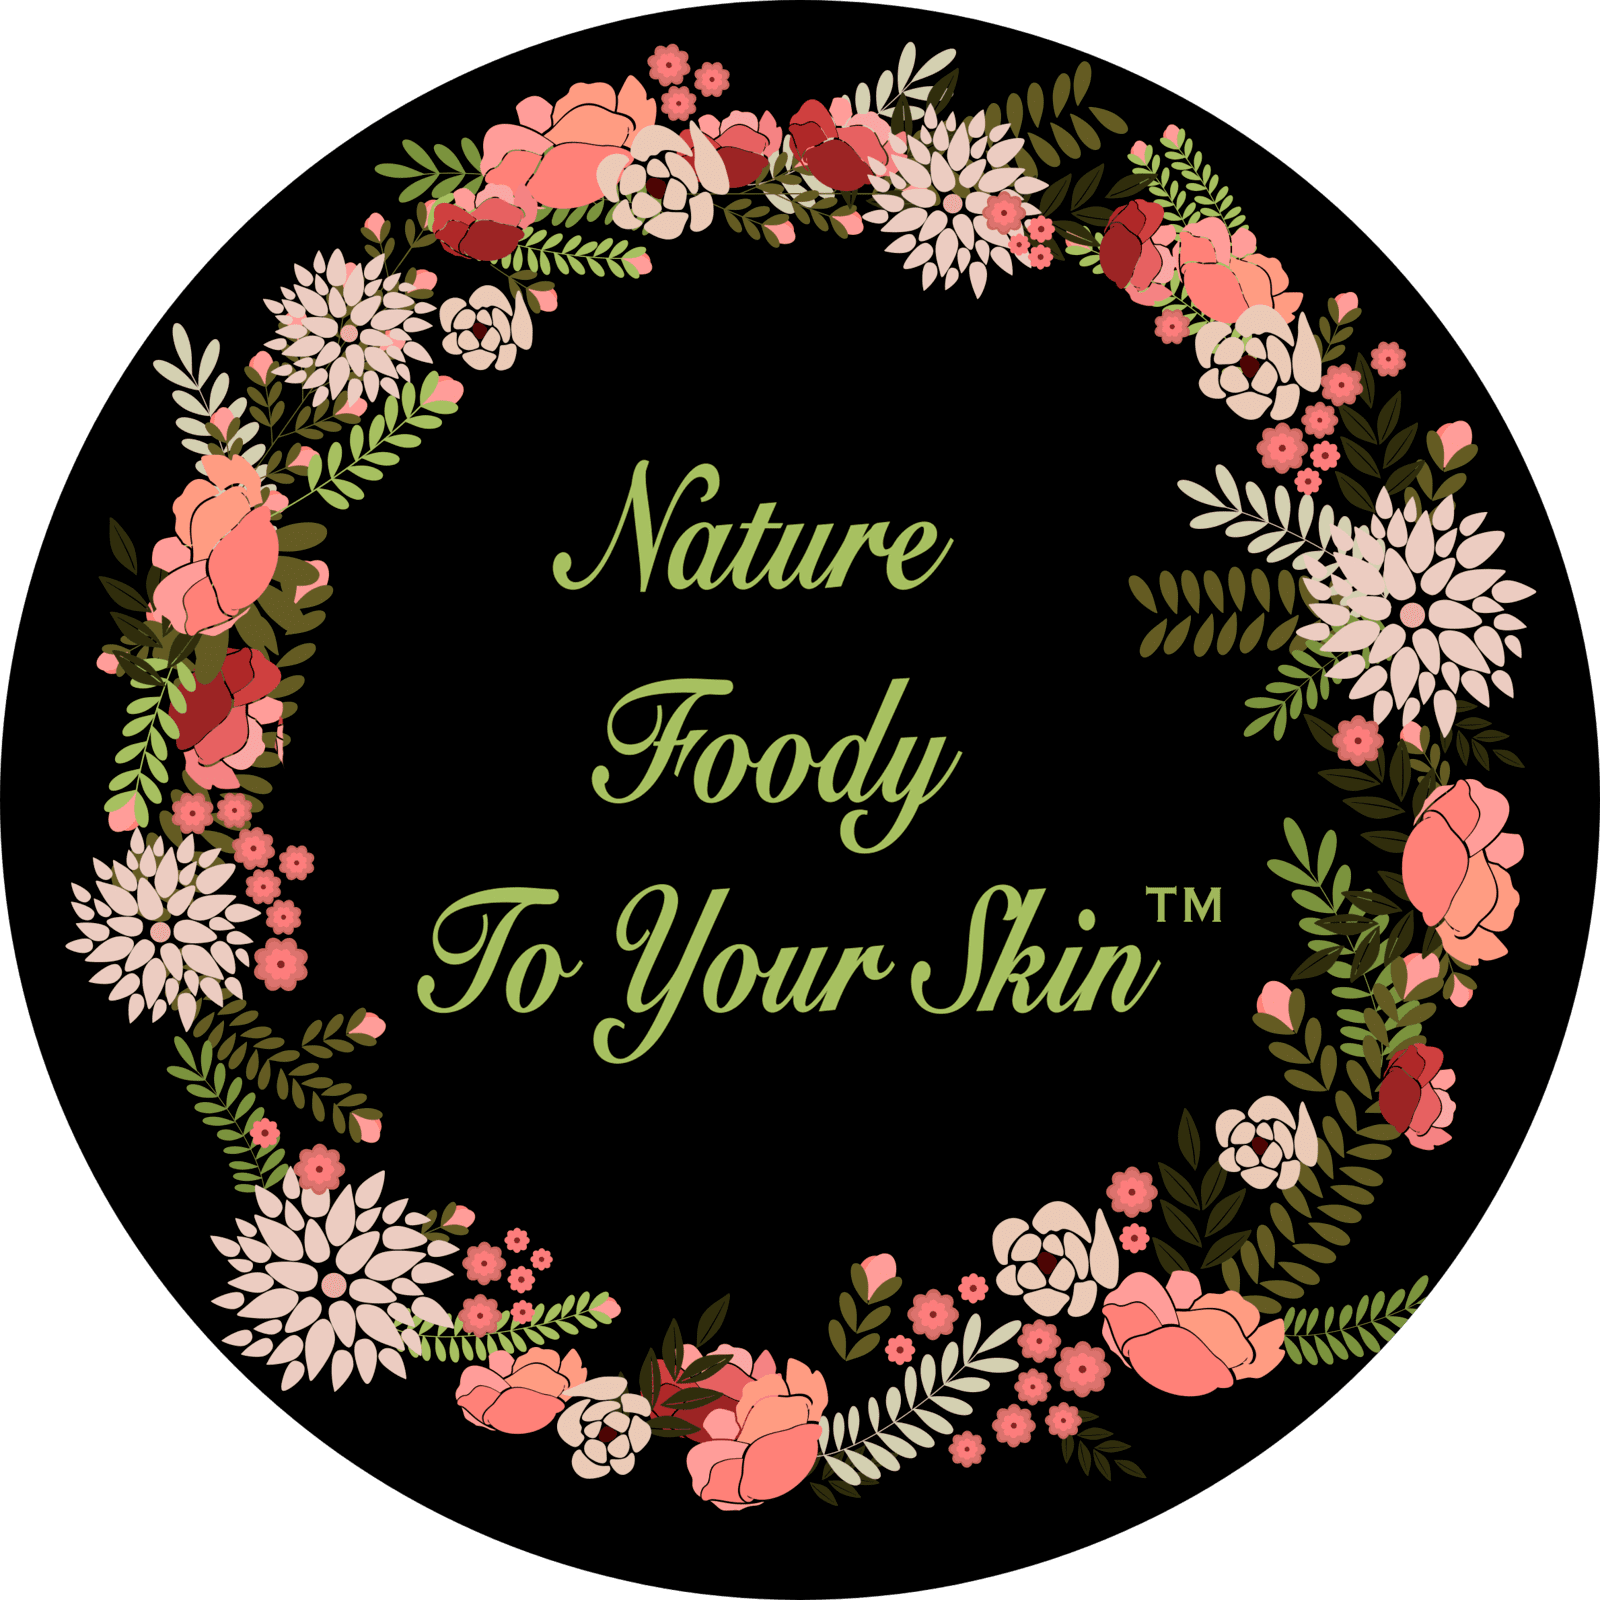 Nature foody to your skin